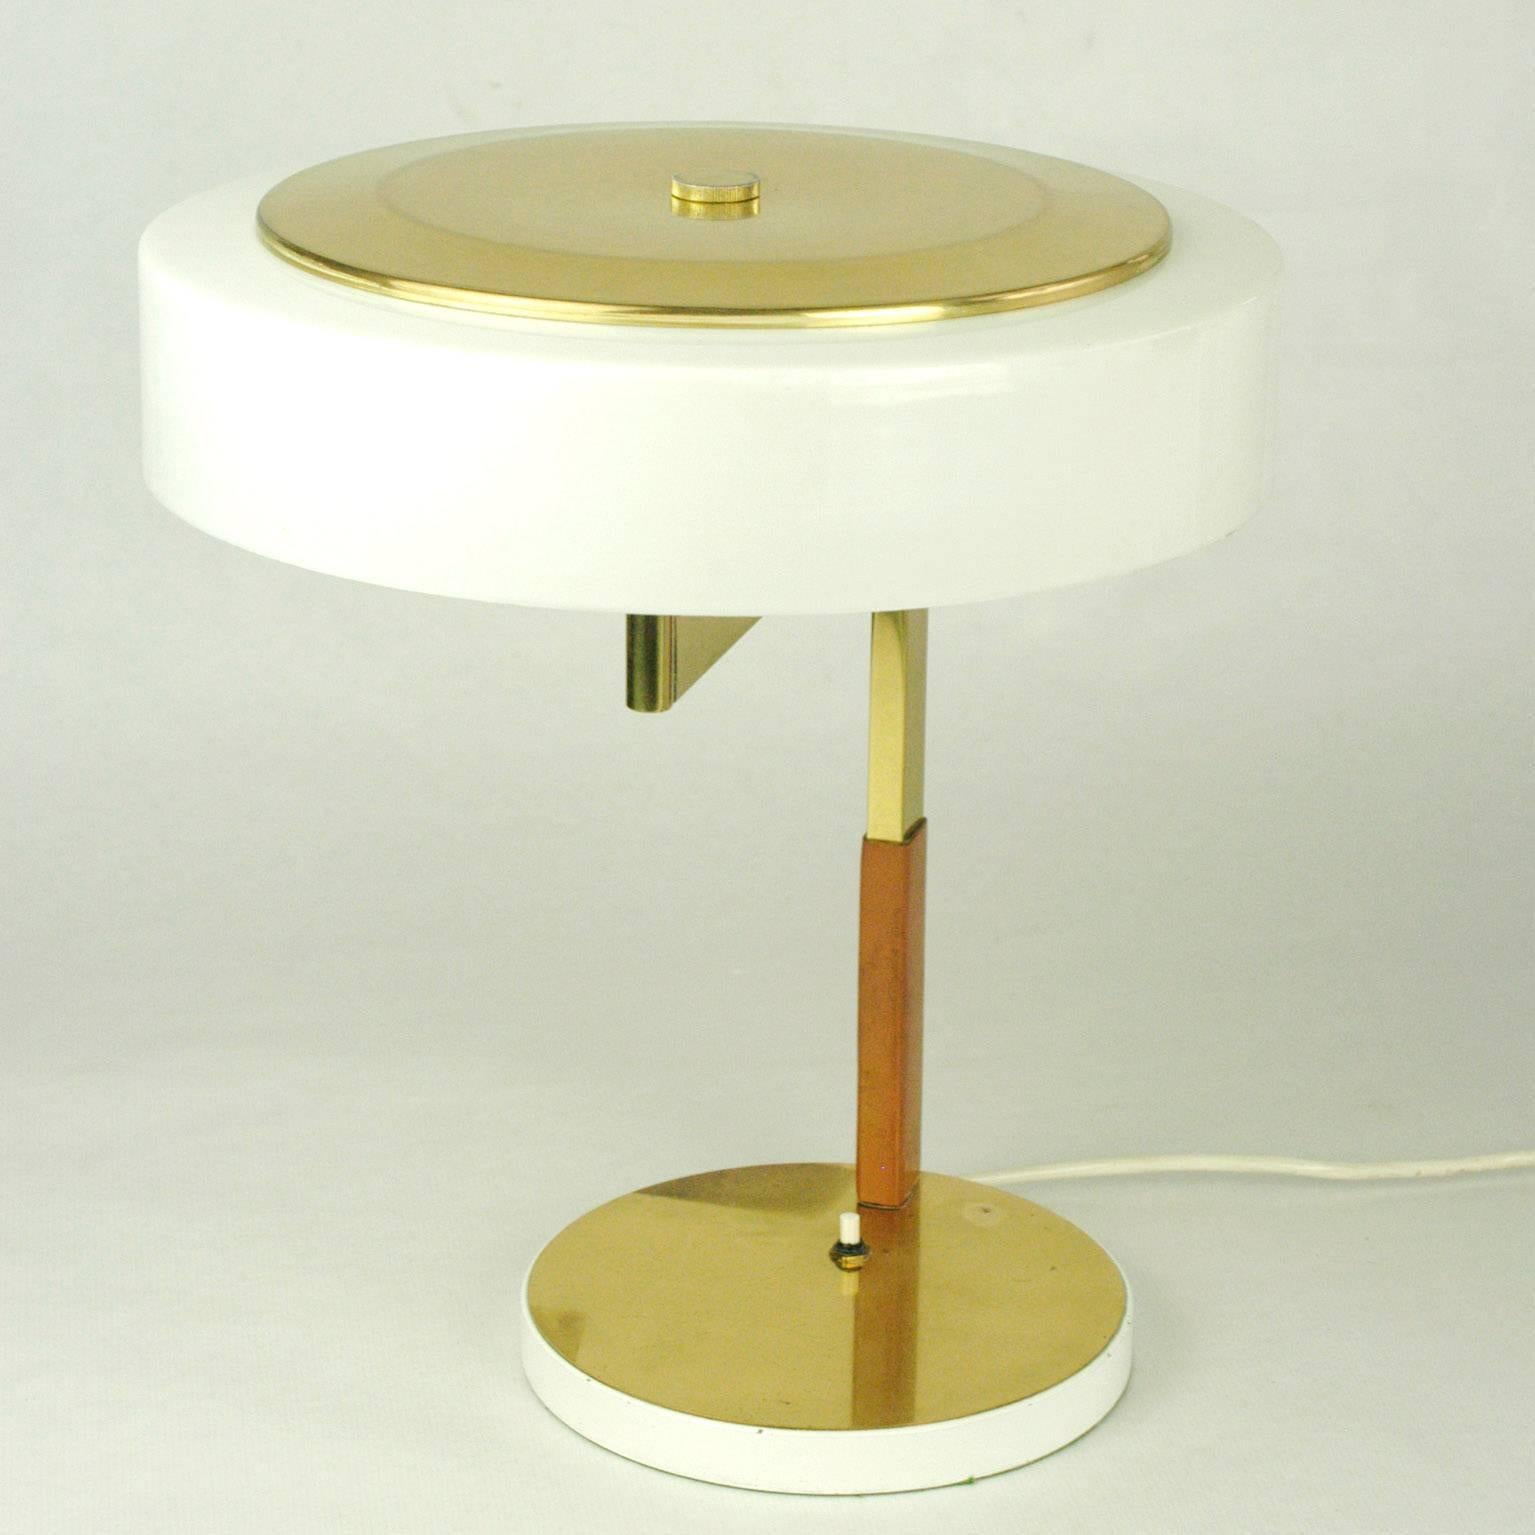 Excellent Austrian 1960s brass, leather and acrylic desk lamp with adjustable shade designed an manufactured by J.T. Kalmar Vienna.